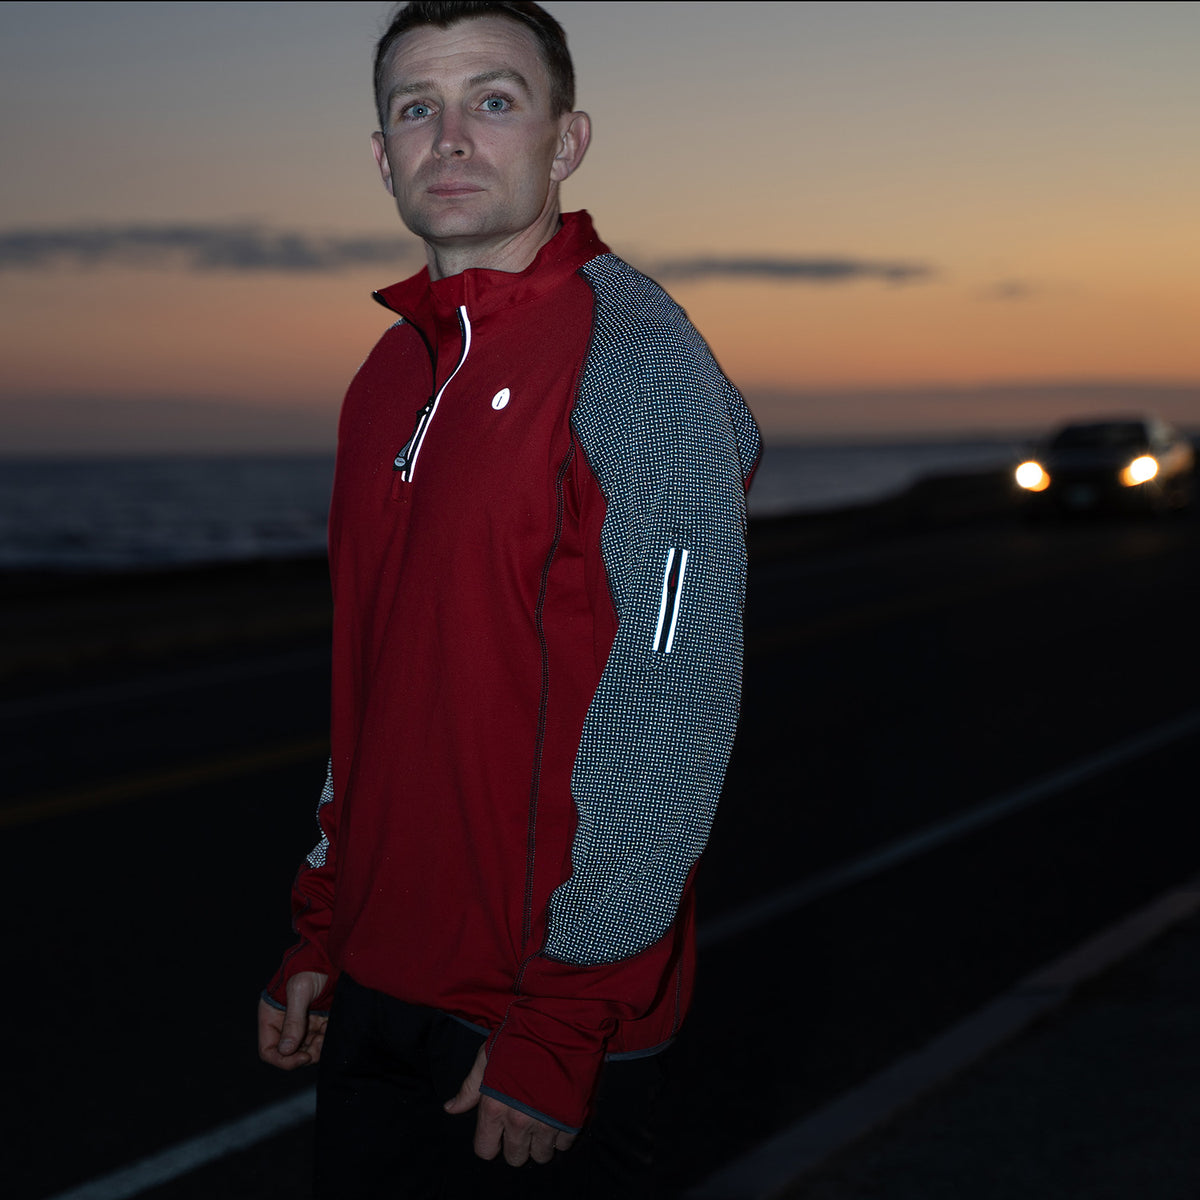 Early Riser Reflective Men's Pullover in Red